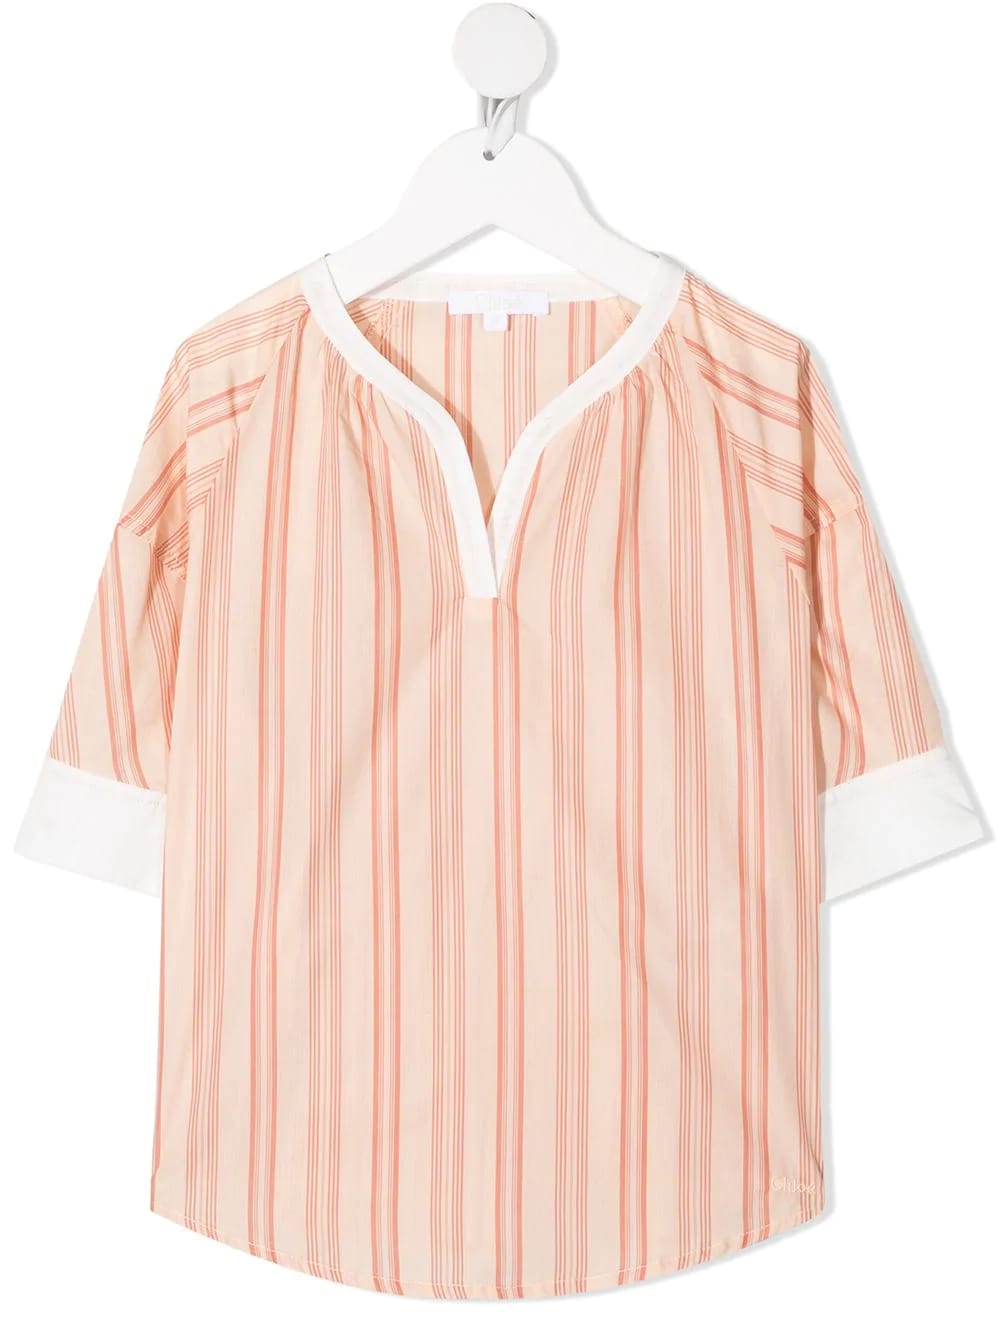 CHLOÉ KID PINK AND WHITE BLOUSE WITH STRIPED PATTERN,C15B71 Z44